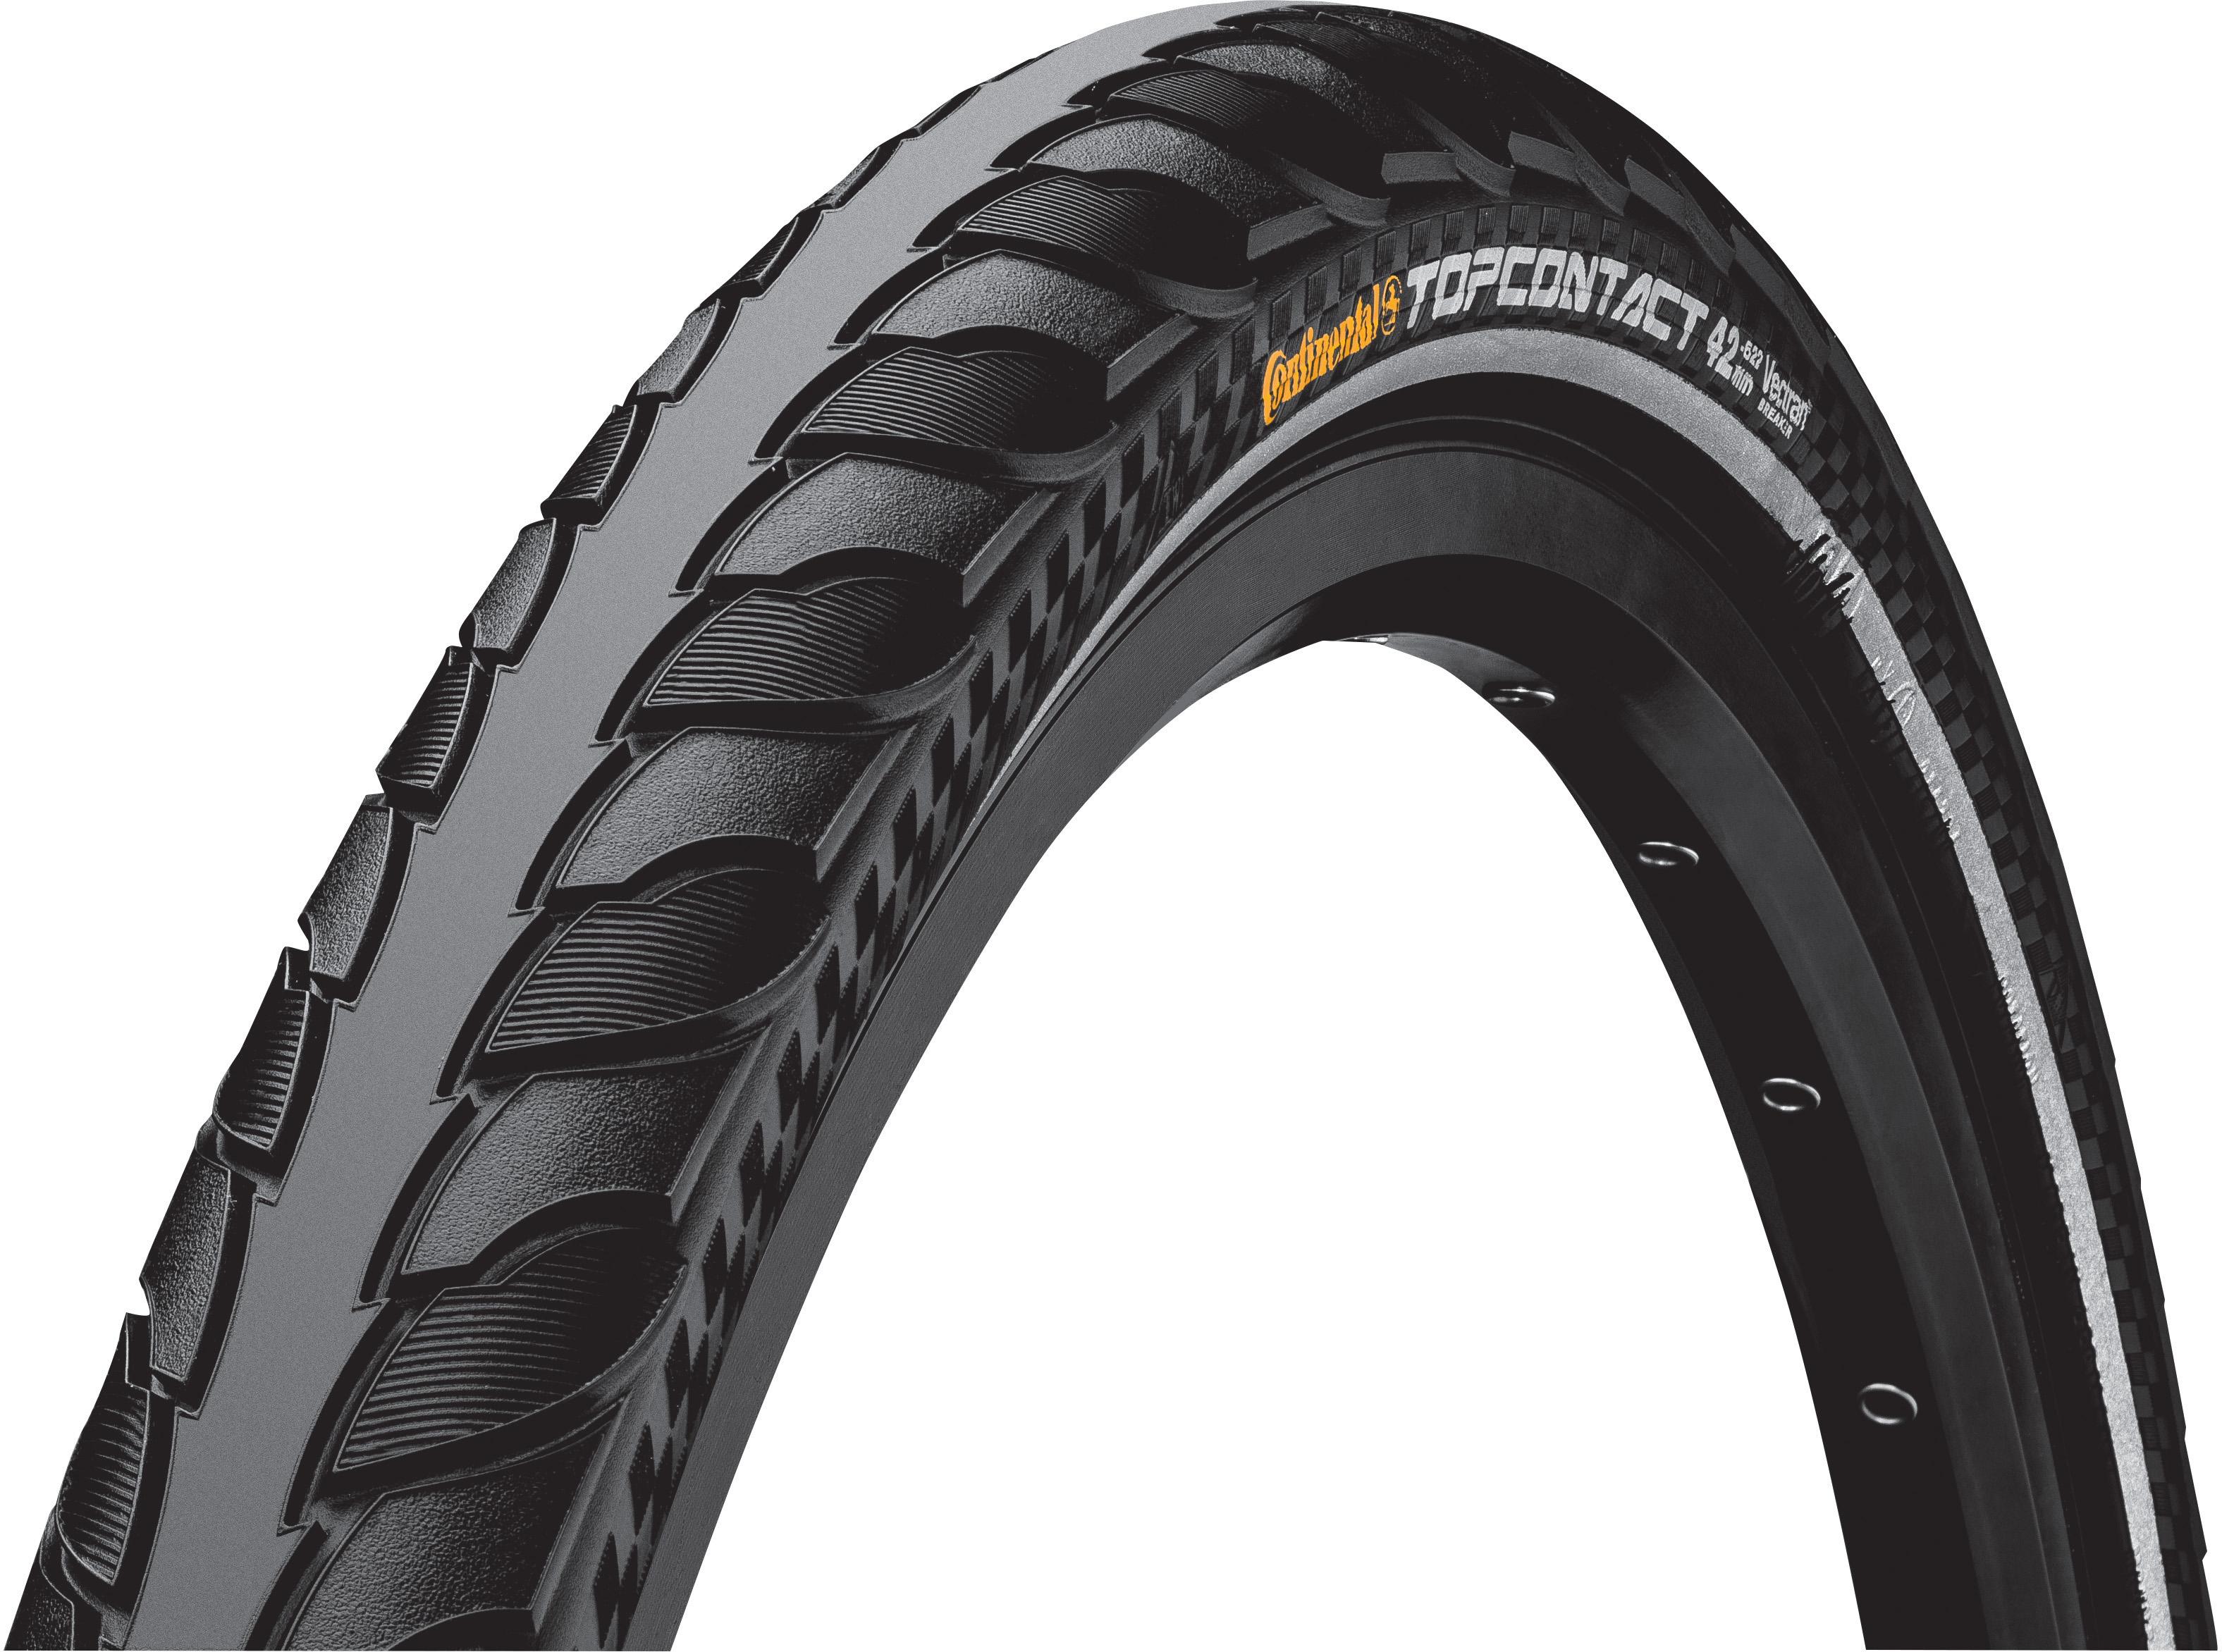 Continental Top Contact Ii City Road Tyre - Black